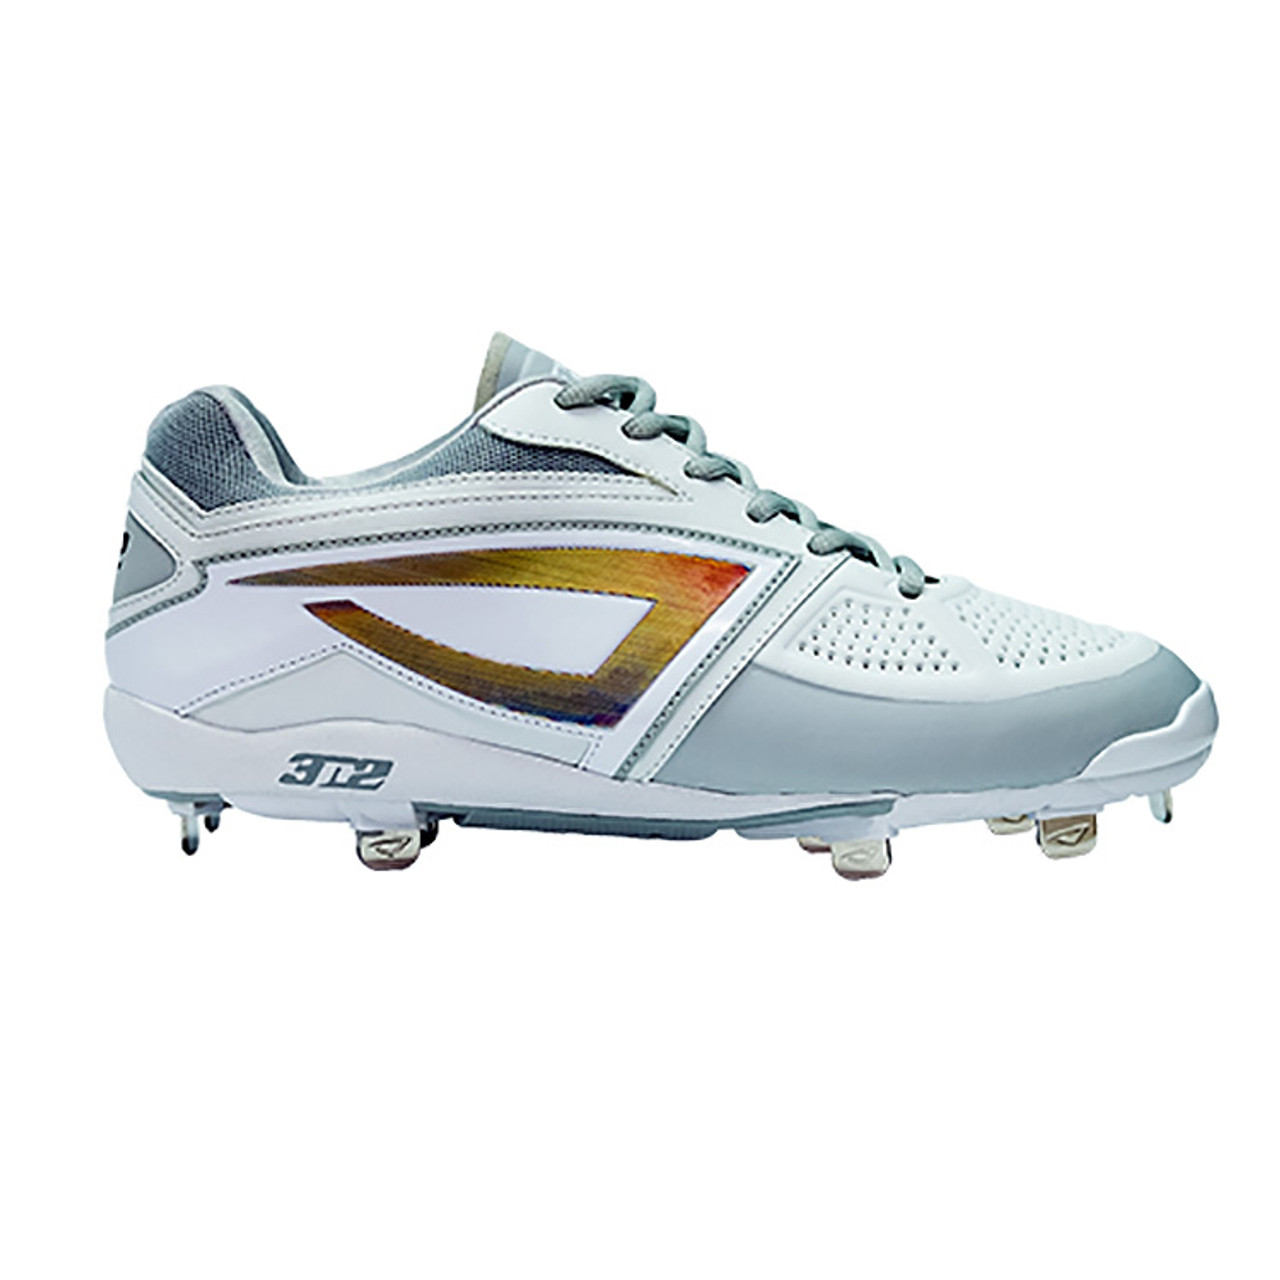 2018 DOM-N-8 Fastpitch Softball Cleats by 3N2 - FREE SHIPPING